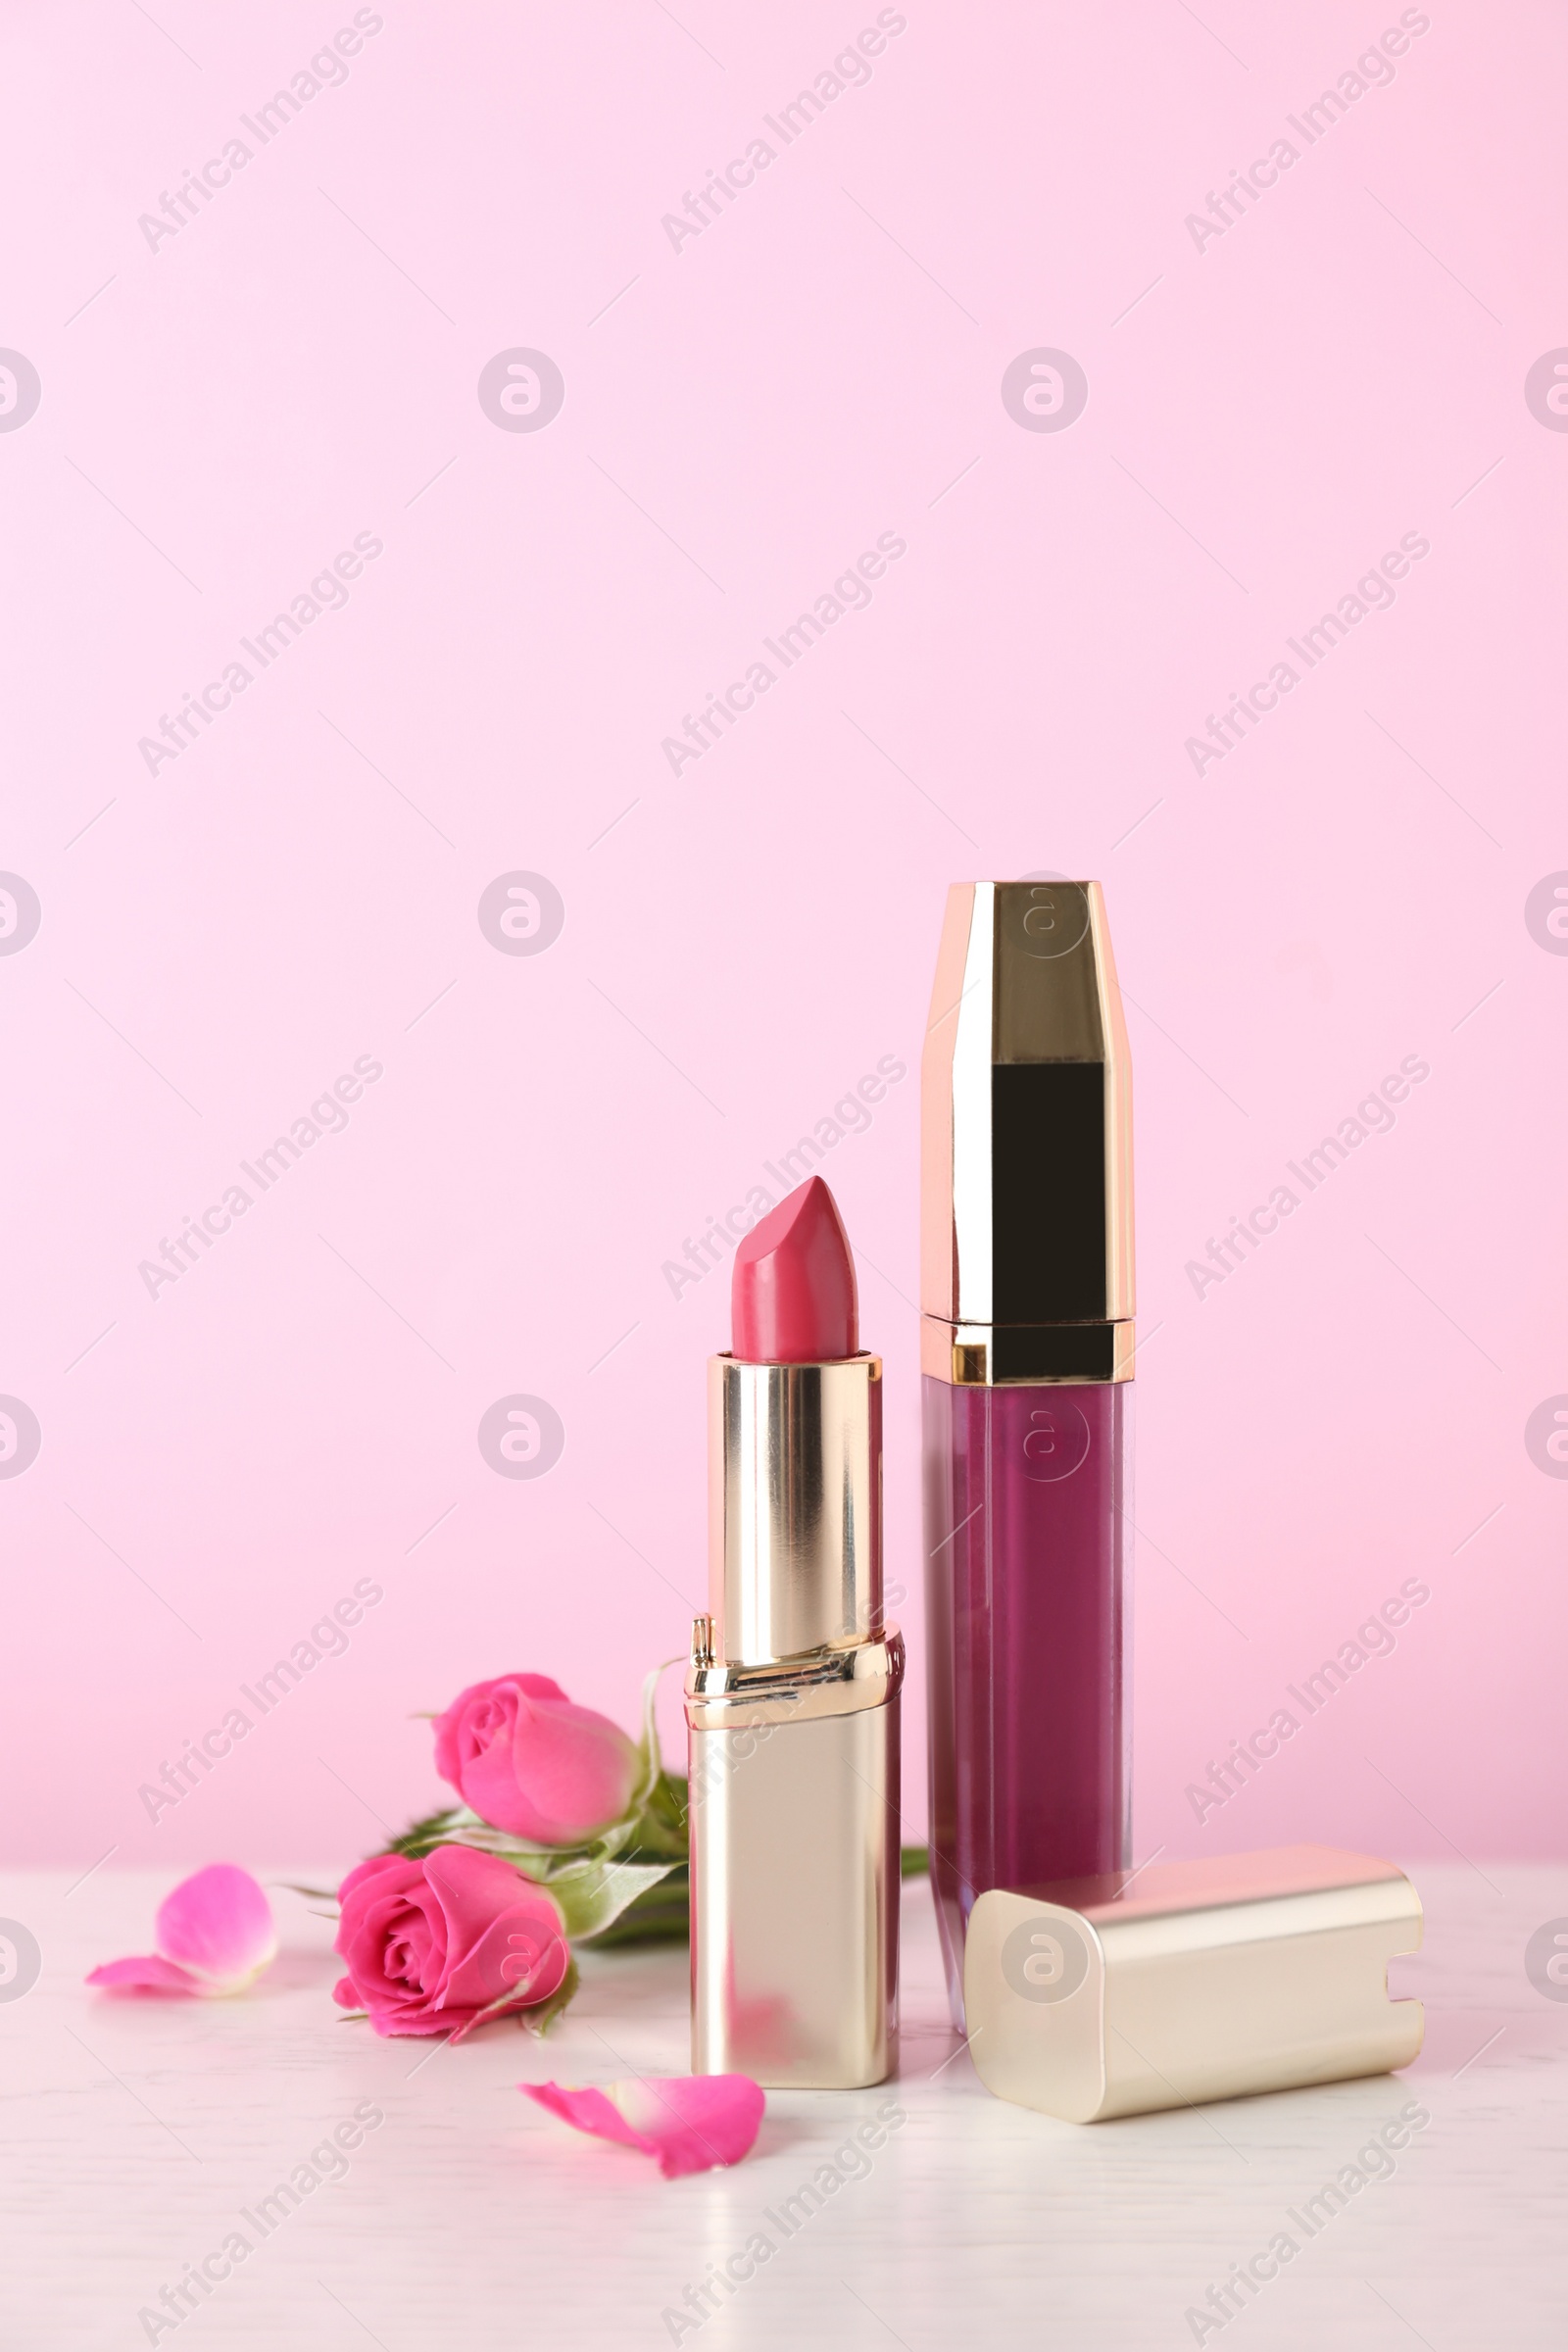 Photo of Lipstick and lip gloss with flowers on table